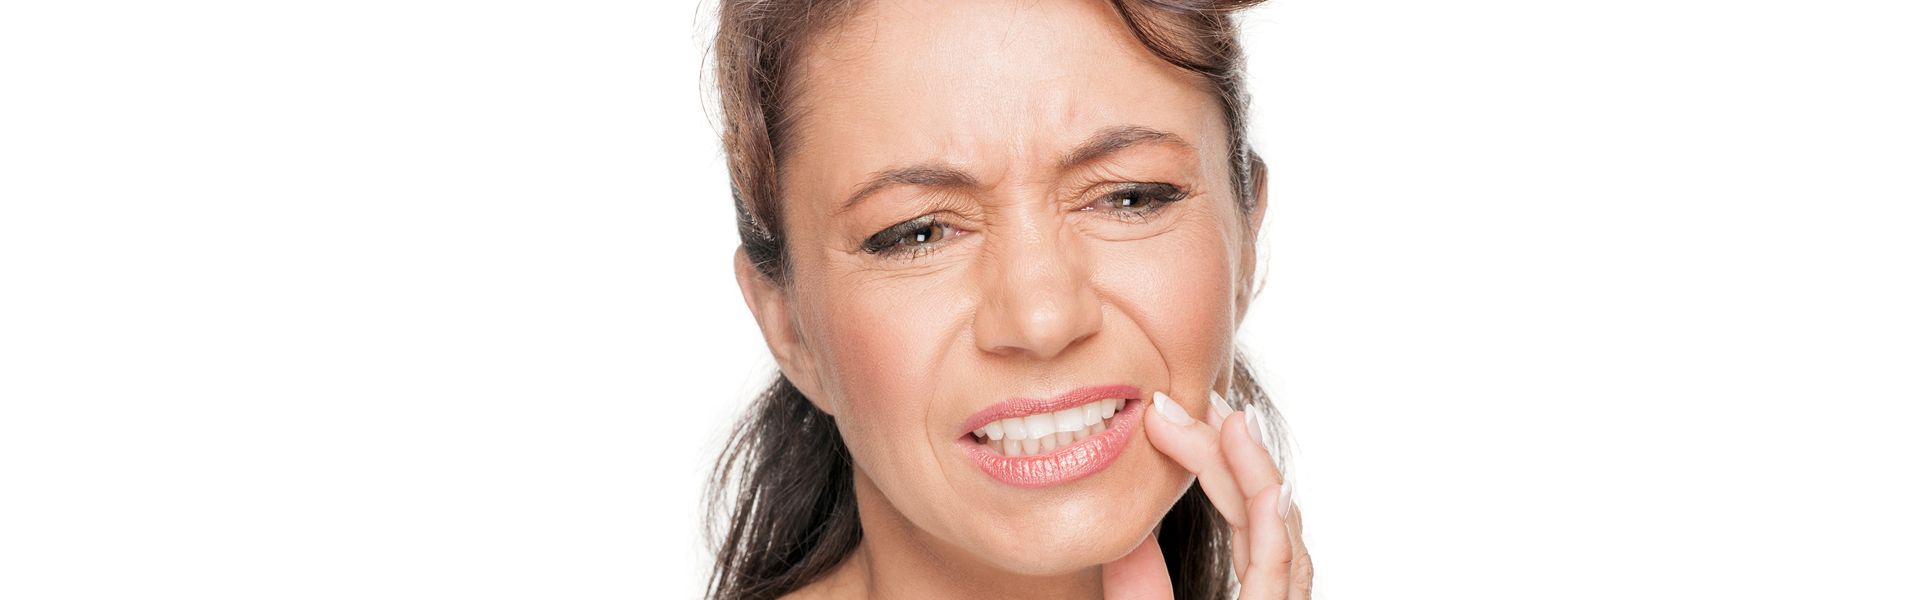 How Long Does the Pain Last After Tooth Extraction?